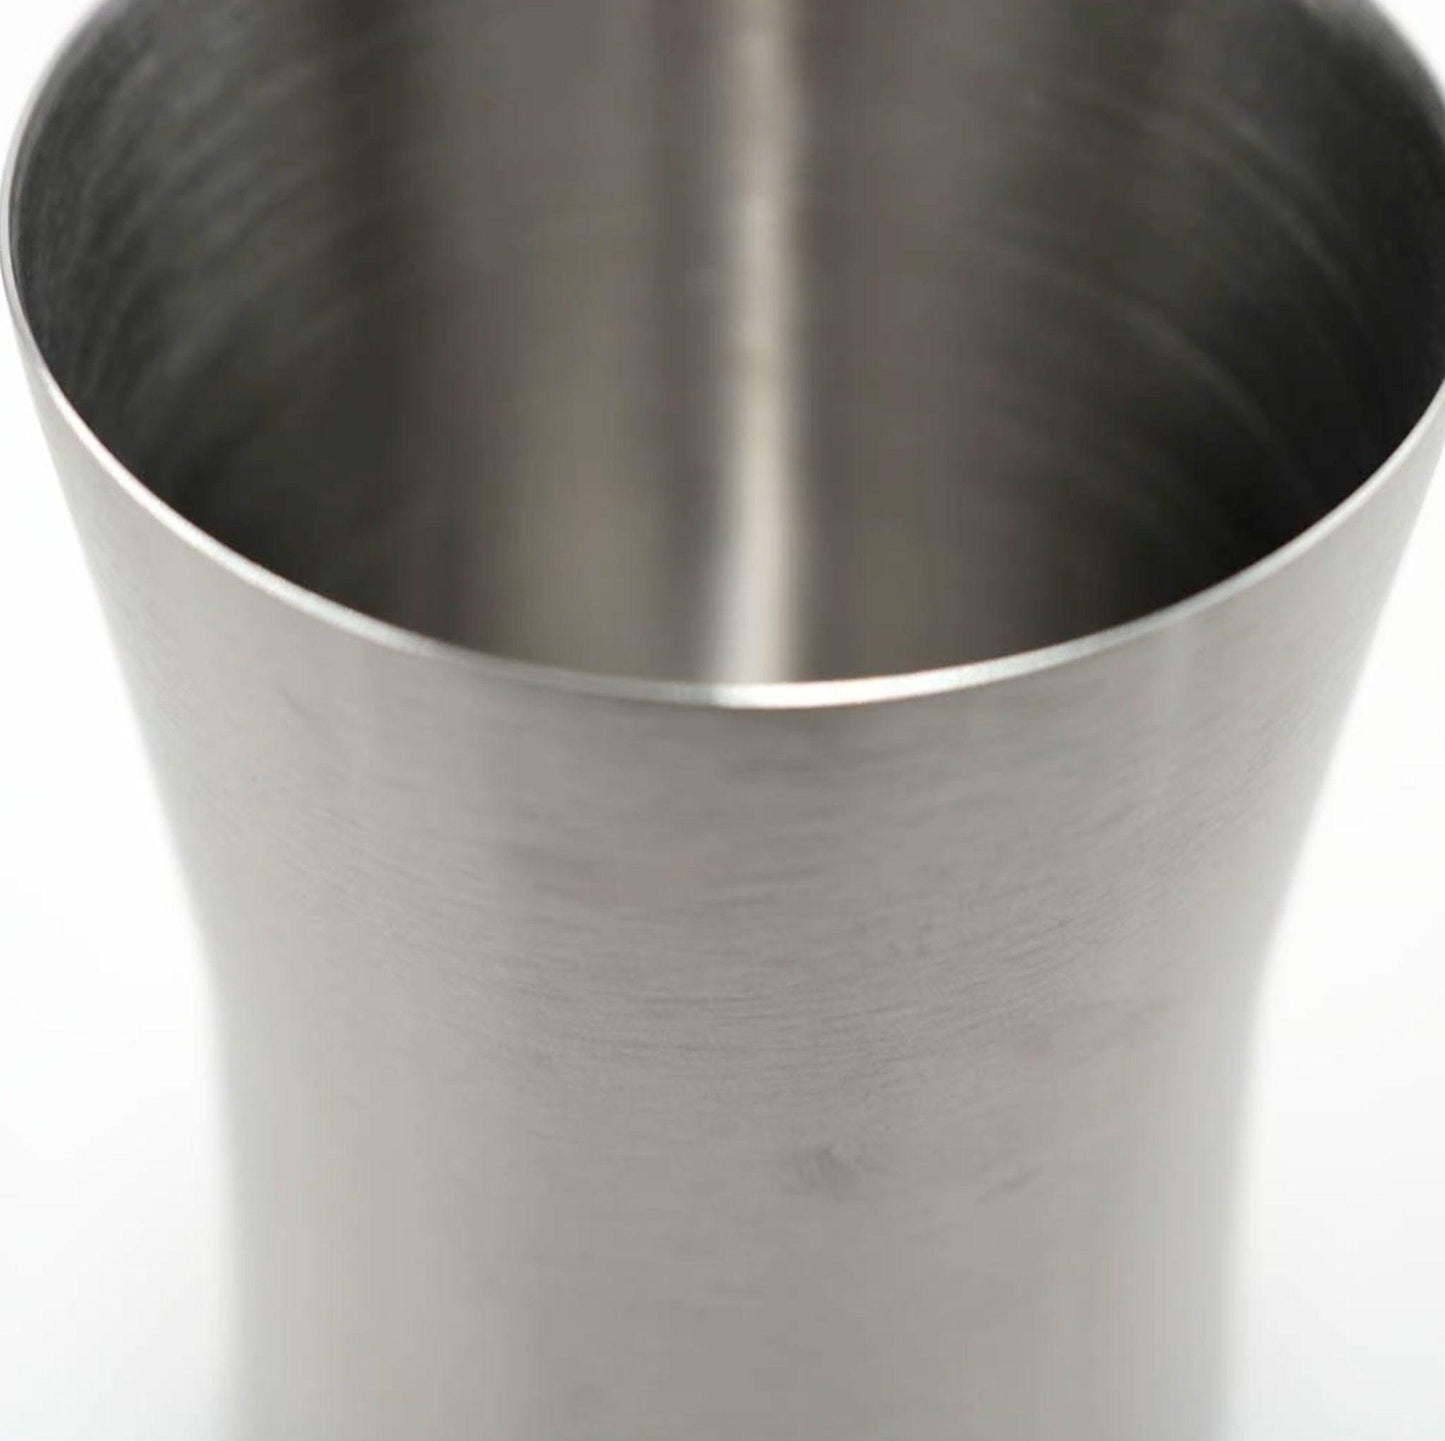 Stainless Steel 350ML Rolling Cup Waist Cup Single Layer Water Cup LI-000015 - CHL-STORE 